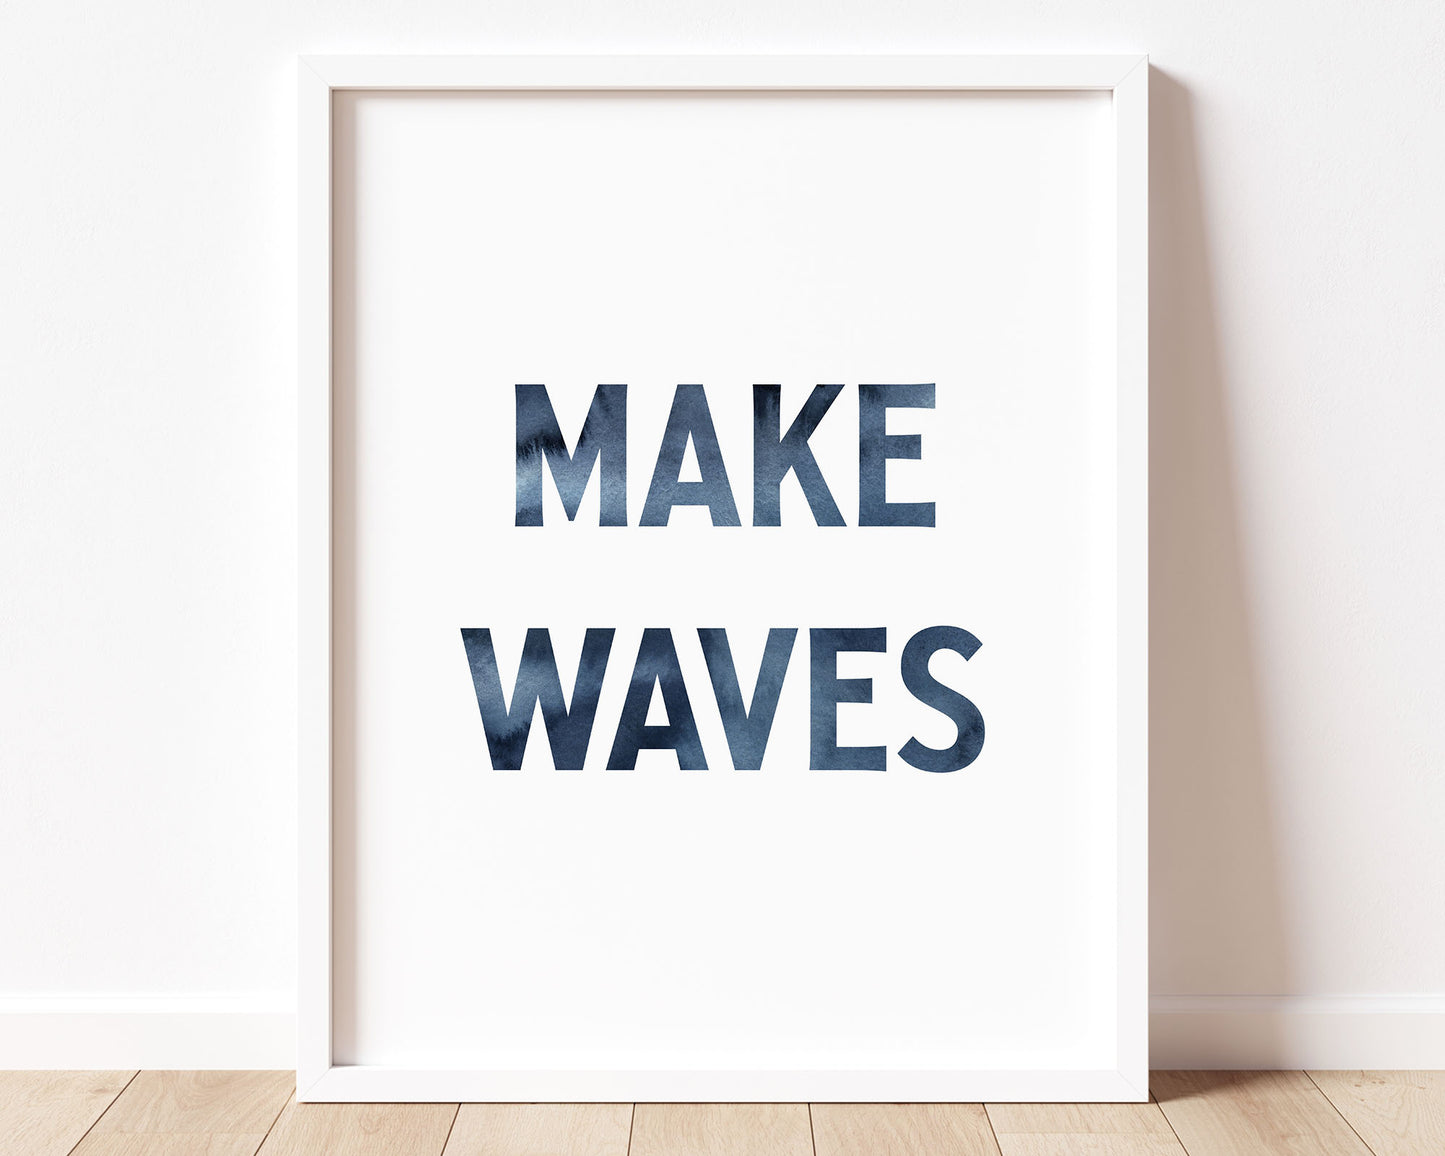 Watercolor Make Waves Printable Wall Art featuring blue watercolor letters.